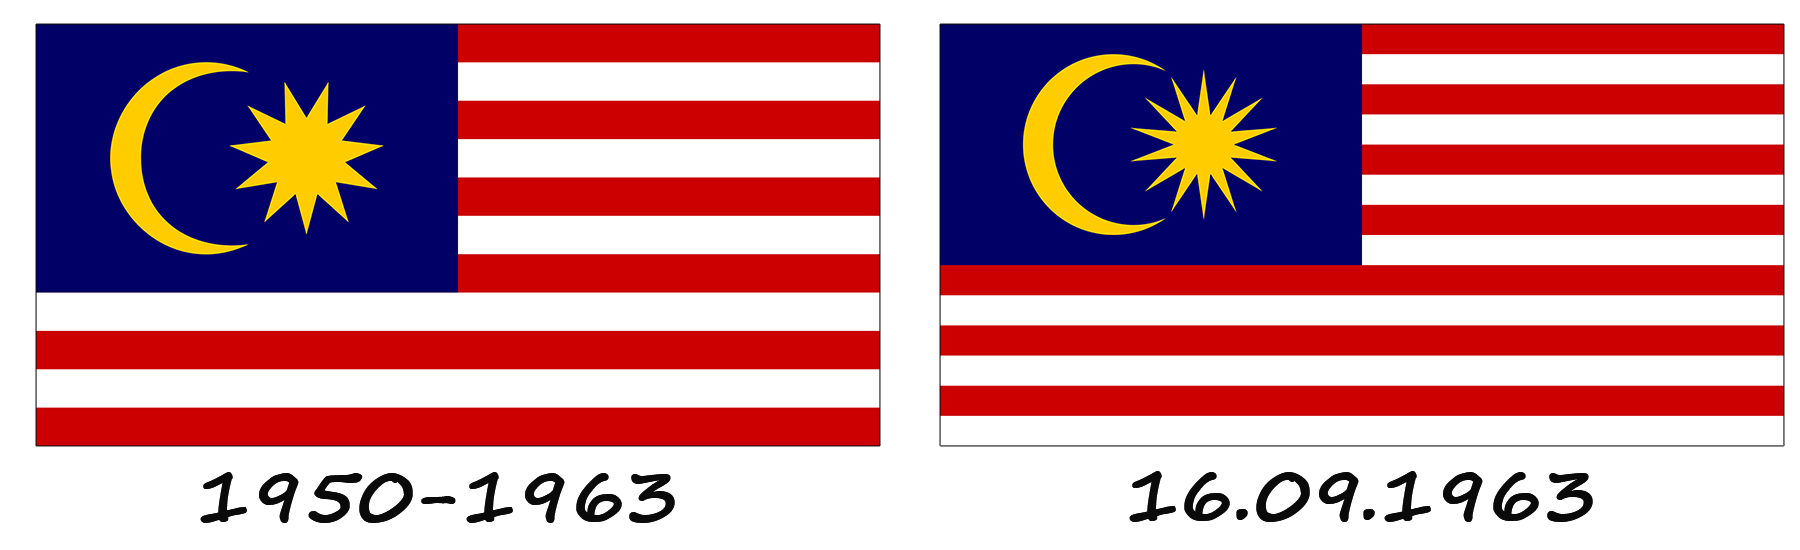 History of the flag of Malaysia